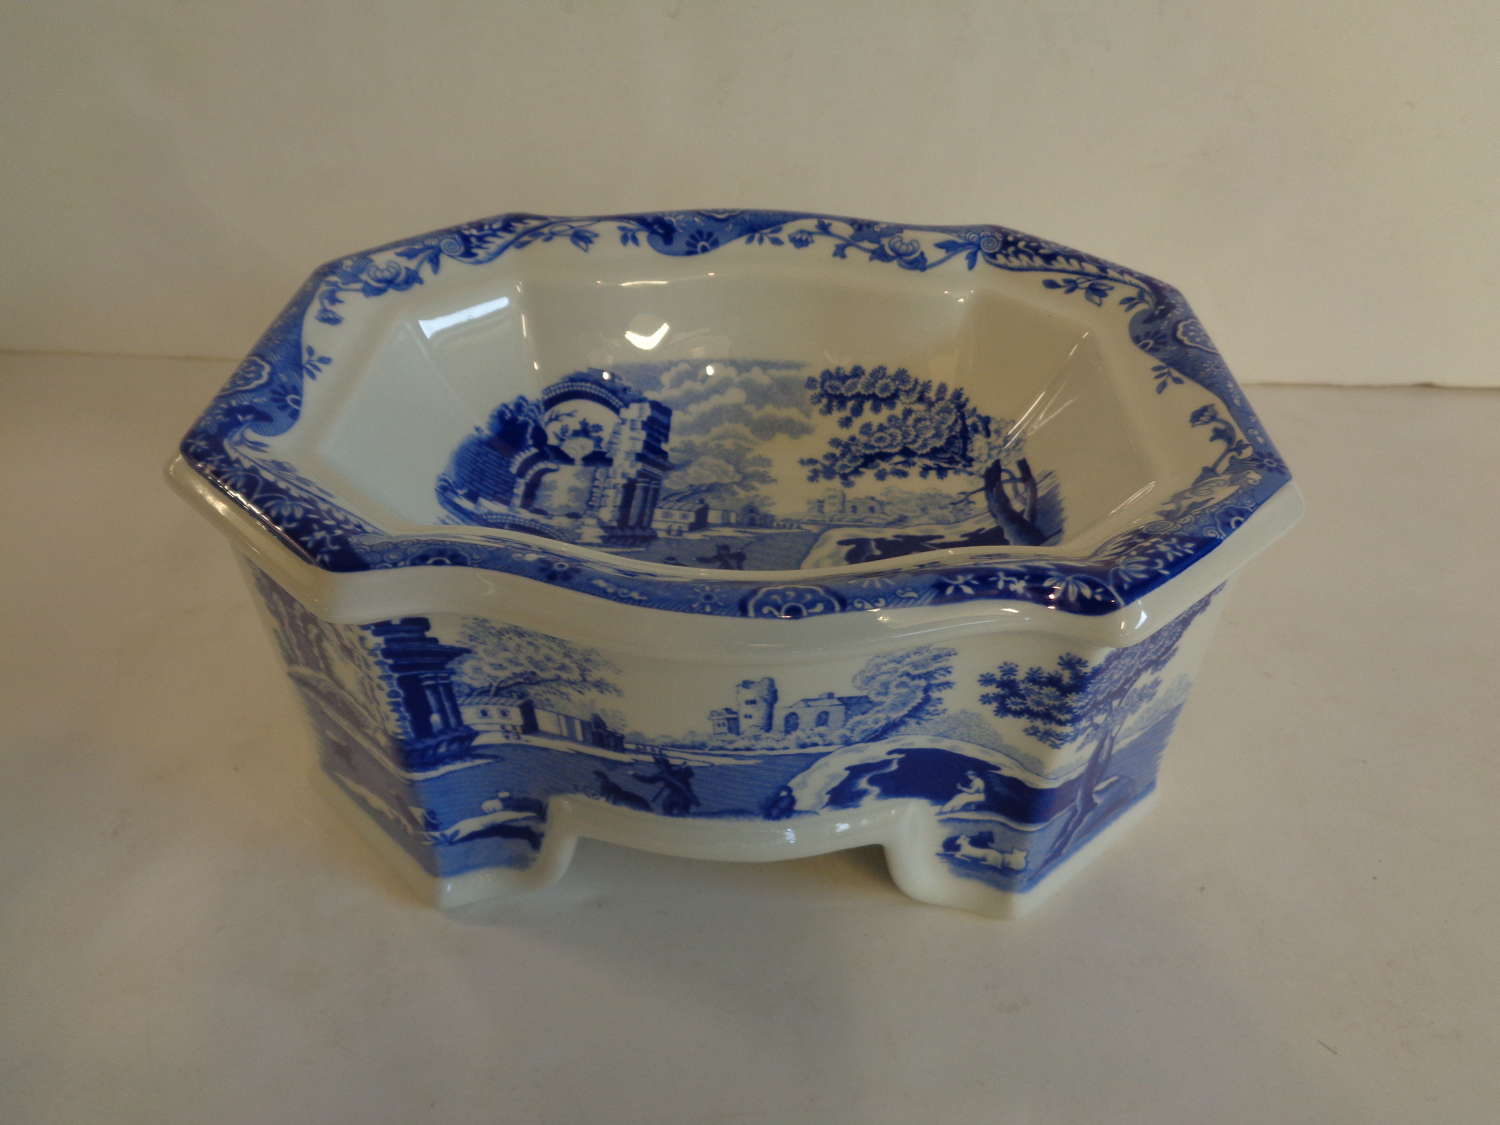 Spode Blue & White Soap Dish - Limited Edition 321 of 750